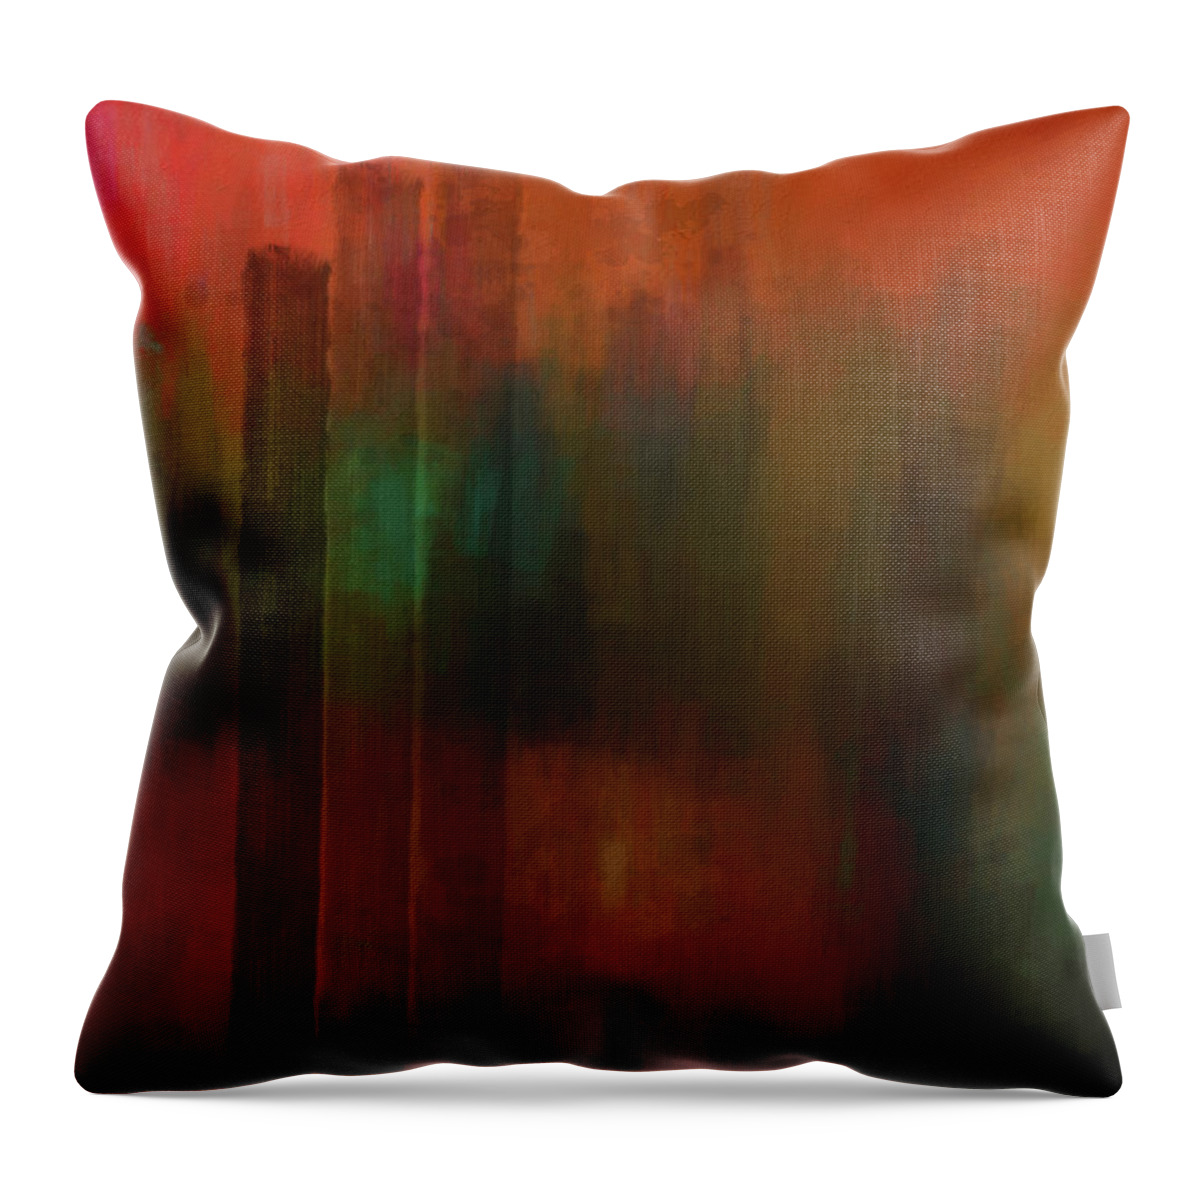 Abstract Throw Pillow featuring the digital art Three Trees by Kandy Hurley